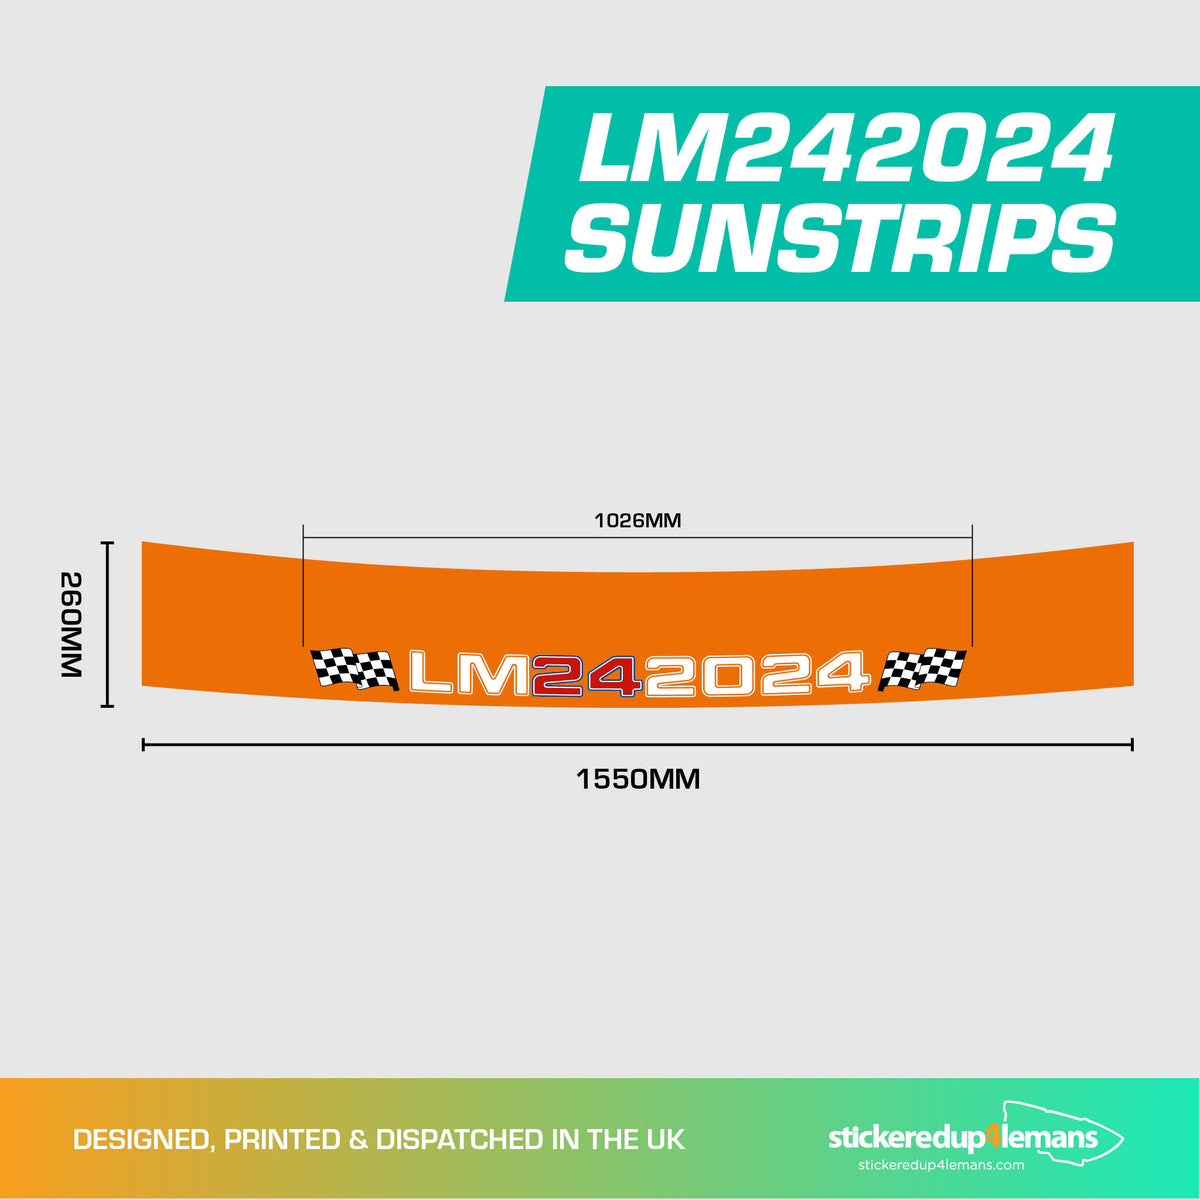 LM242024 Sunstrips